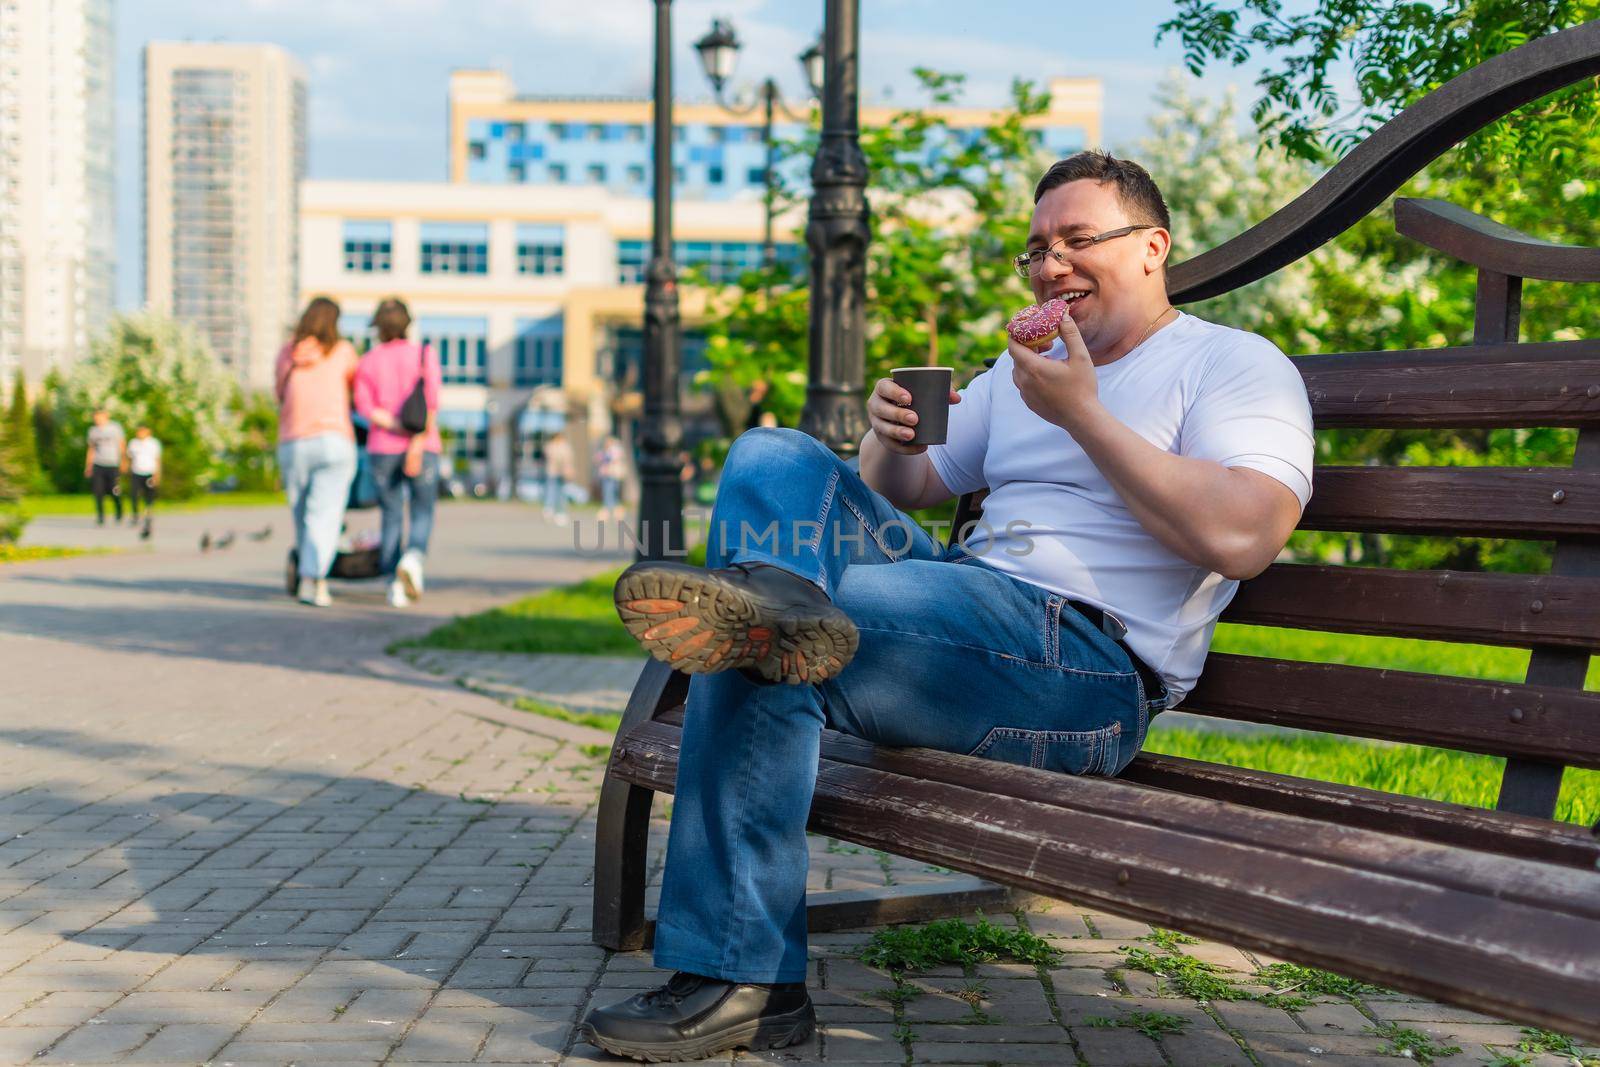 Happy man enjoying delicious donut and drink, laughing while sitting on a park bench